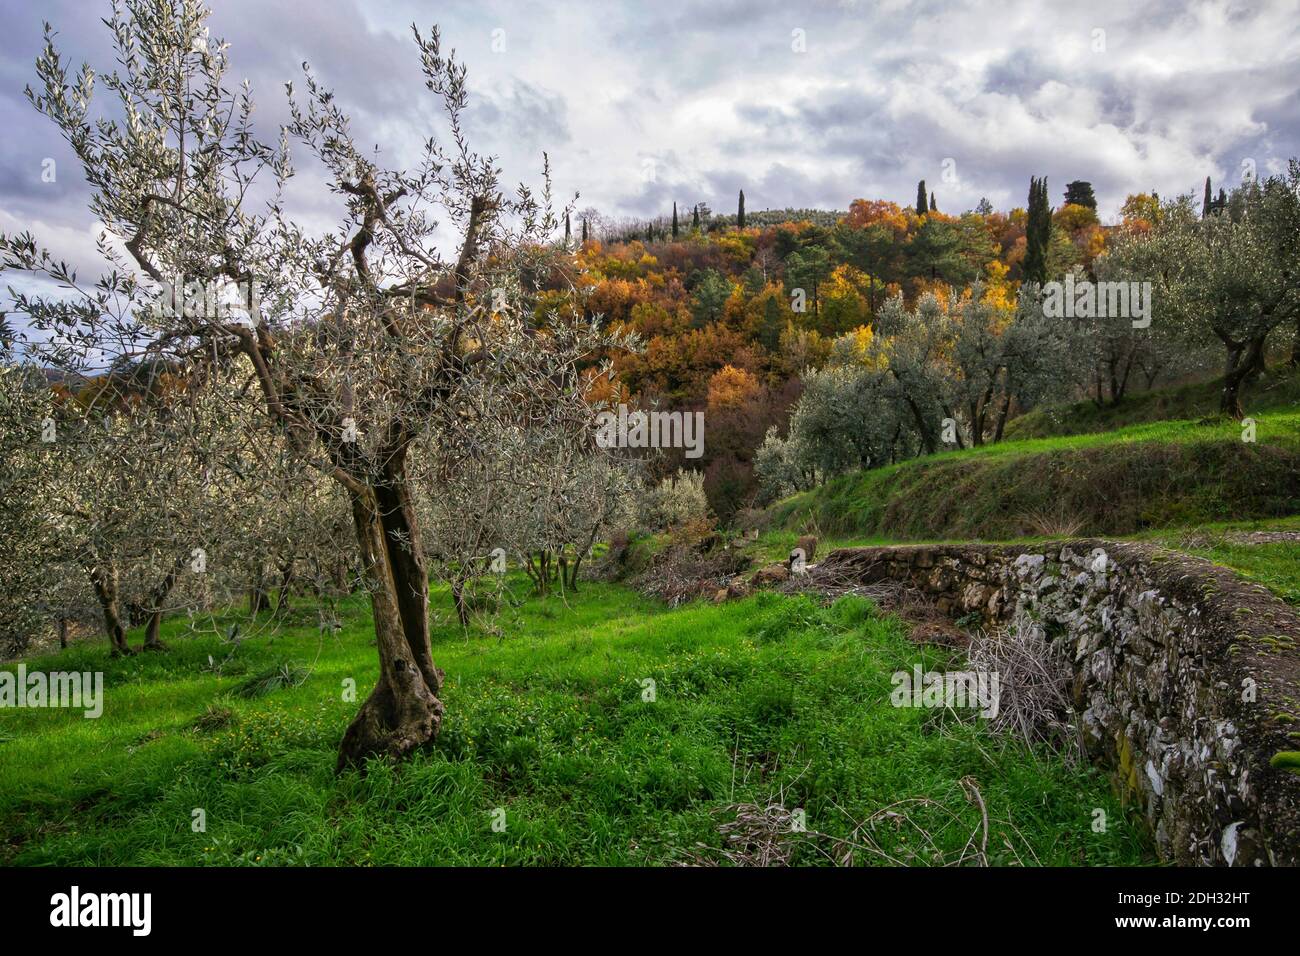 old olive tree in a field with background of olive grove and hill in autumn colours Stock Photo